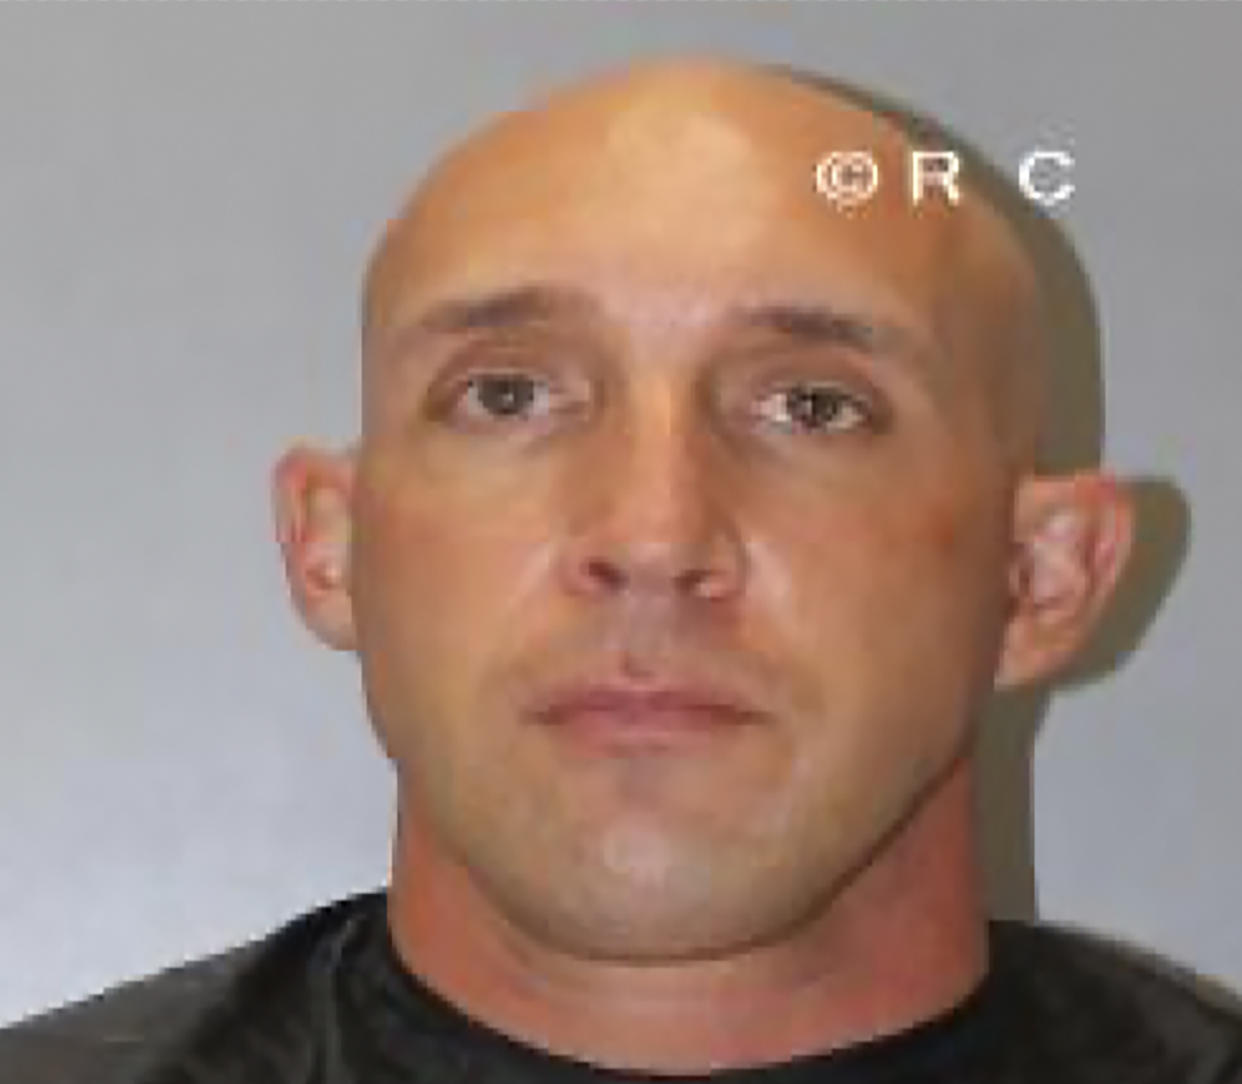 This April 14, 2021, booking photo provided by the Richland County, S.C., detention center shows Jonathan Pentland, a U.S. Army staff sergeant charged with third-degree assault and battery after a video went viral depicting him accosting and shoving a Black man in a South Carolina neighborhood. (Alvin S. Glenn Detention Center via AP)